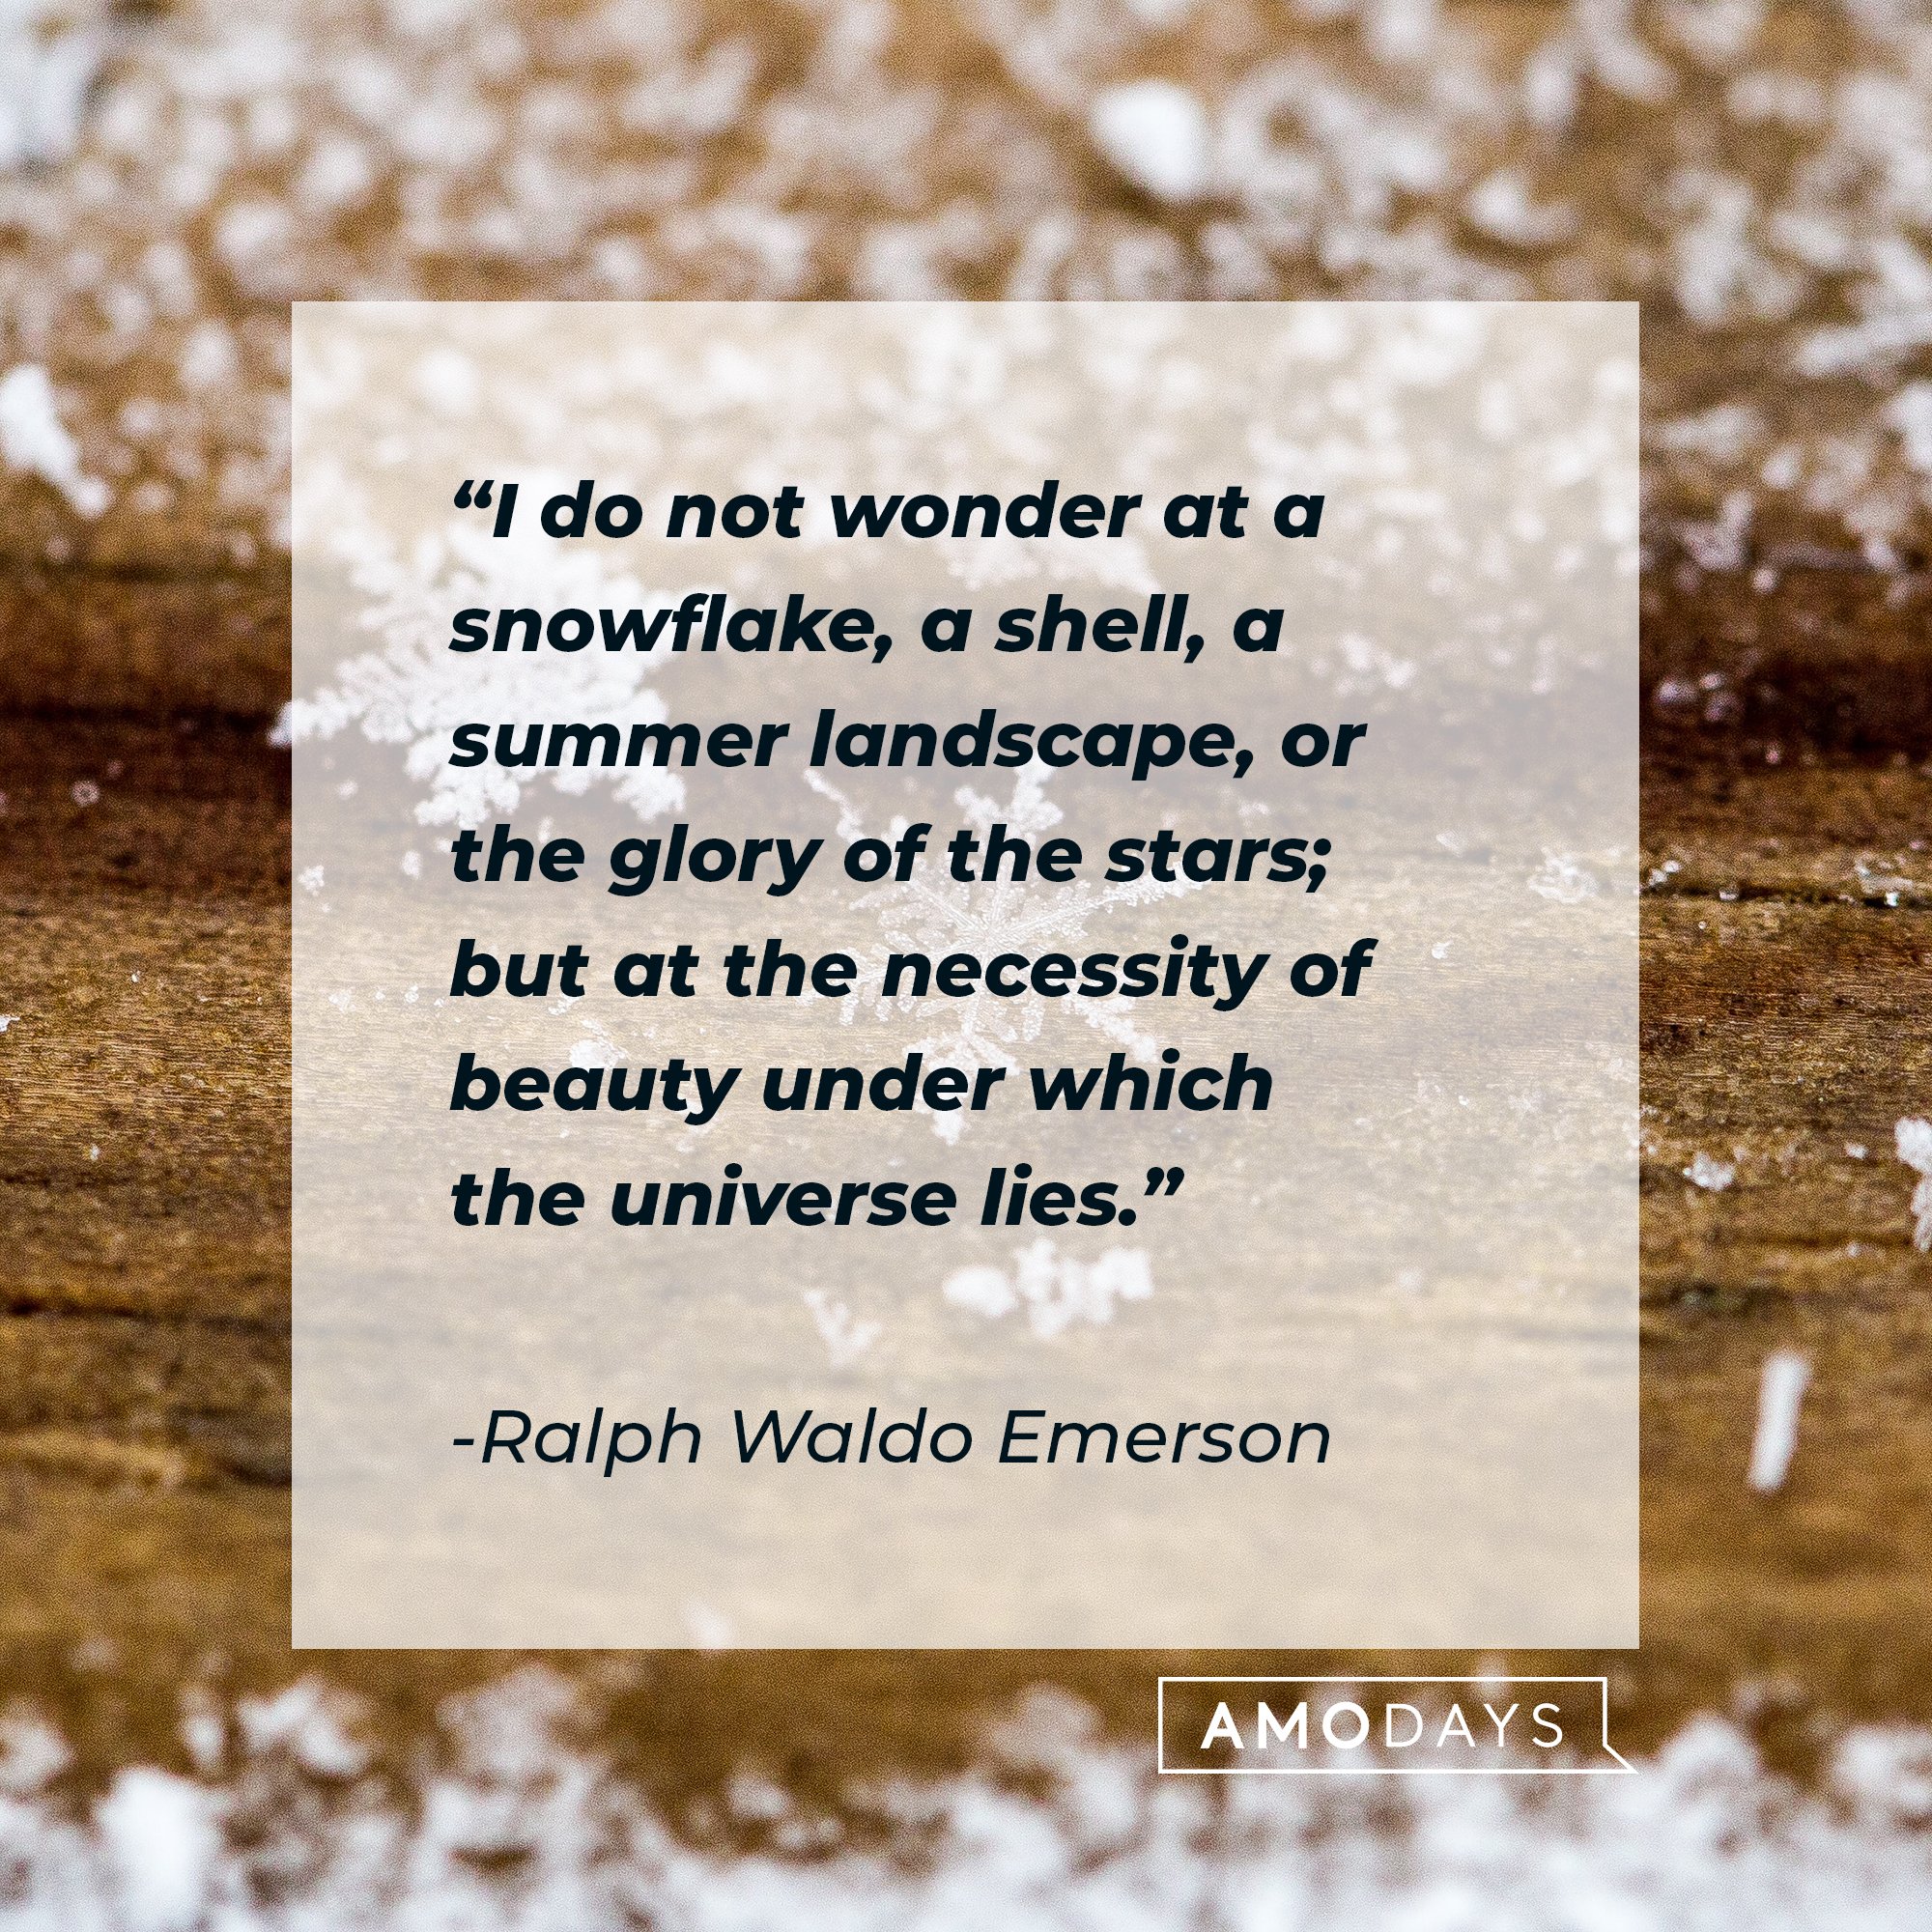 Ralph Waldo Emerson’s quote: "I do not wonder at a snowflake, a shell, a summer landscape, or the glory of the stars; but at the necessity of beauty under which the universe lies." | Image: AmoDays